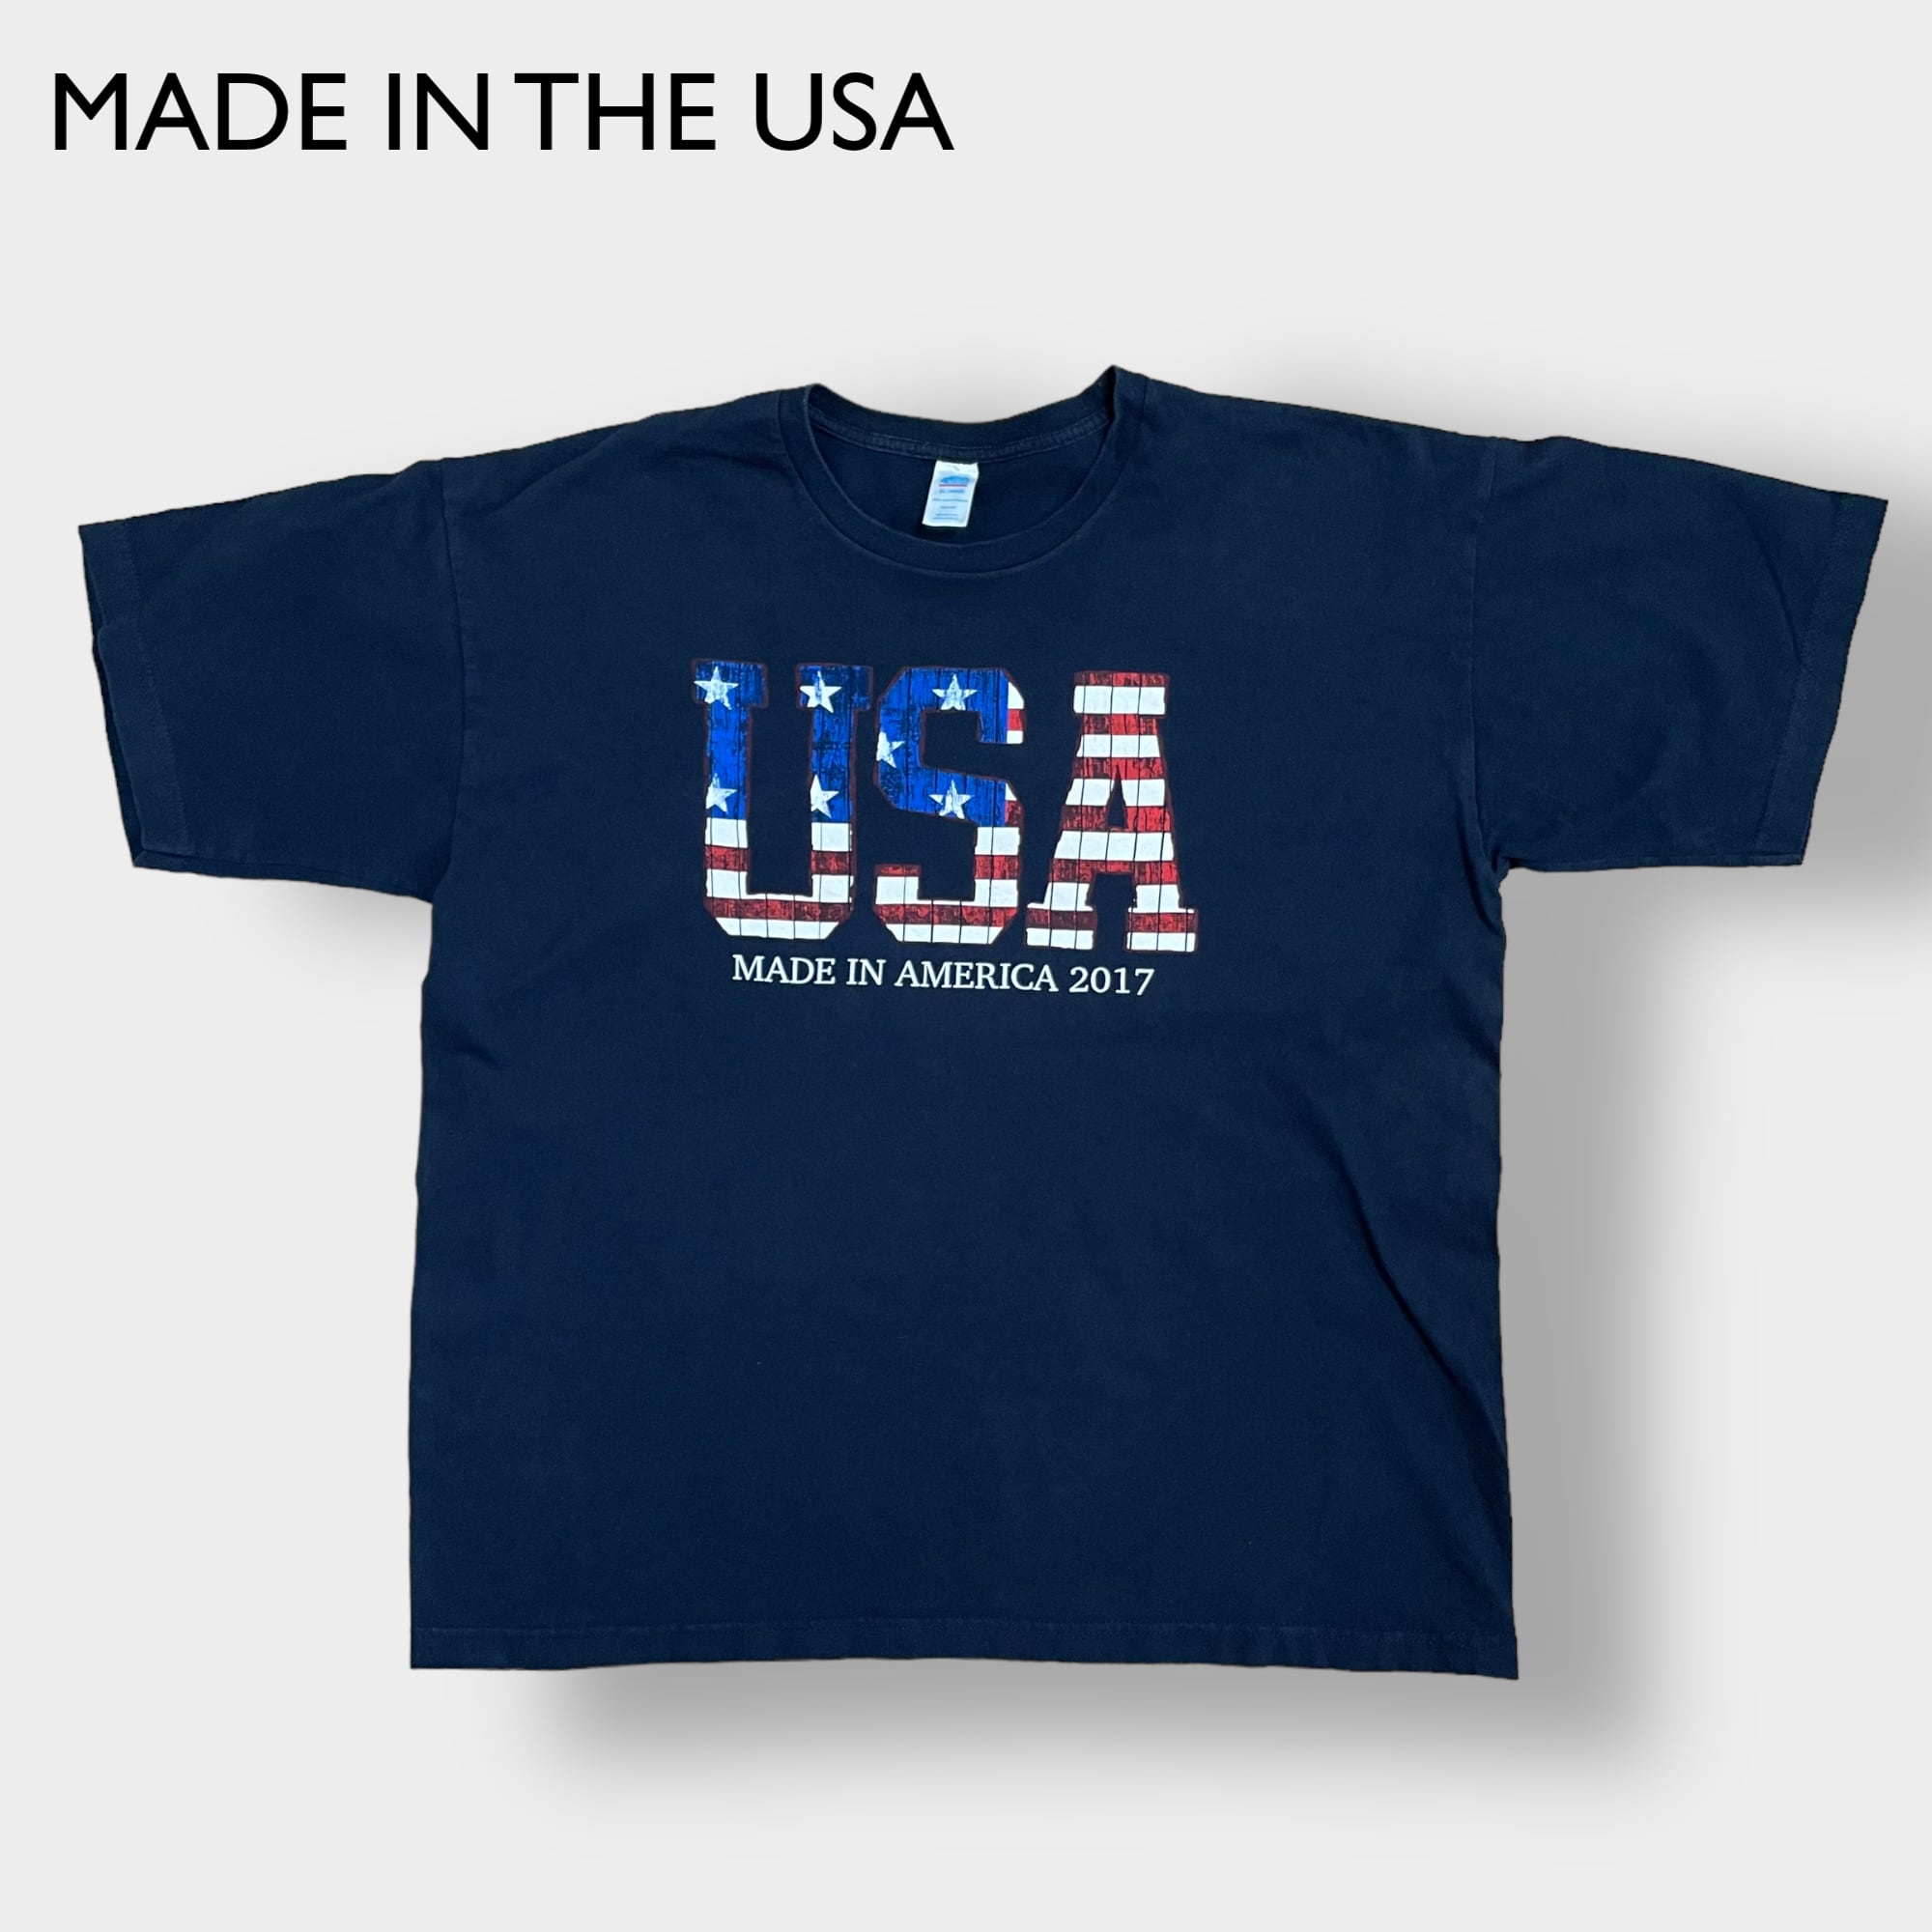 MADE IN THE USA】USA製 XL ビッグサイズ 星条旗 USAロゴ プリント T 